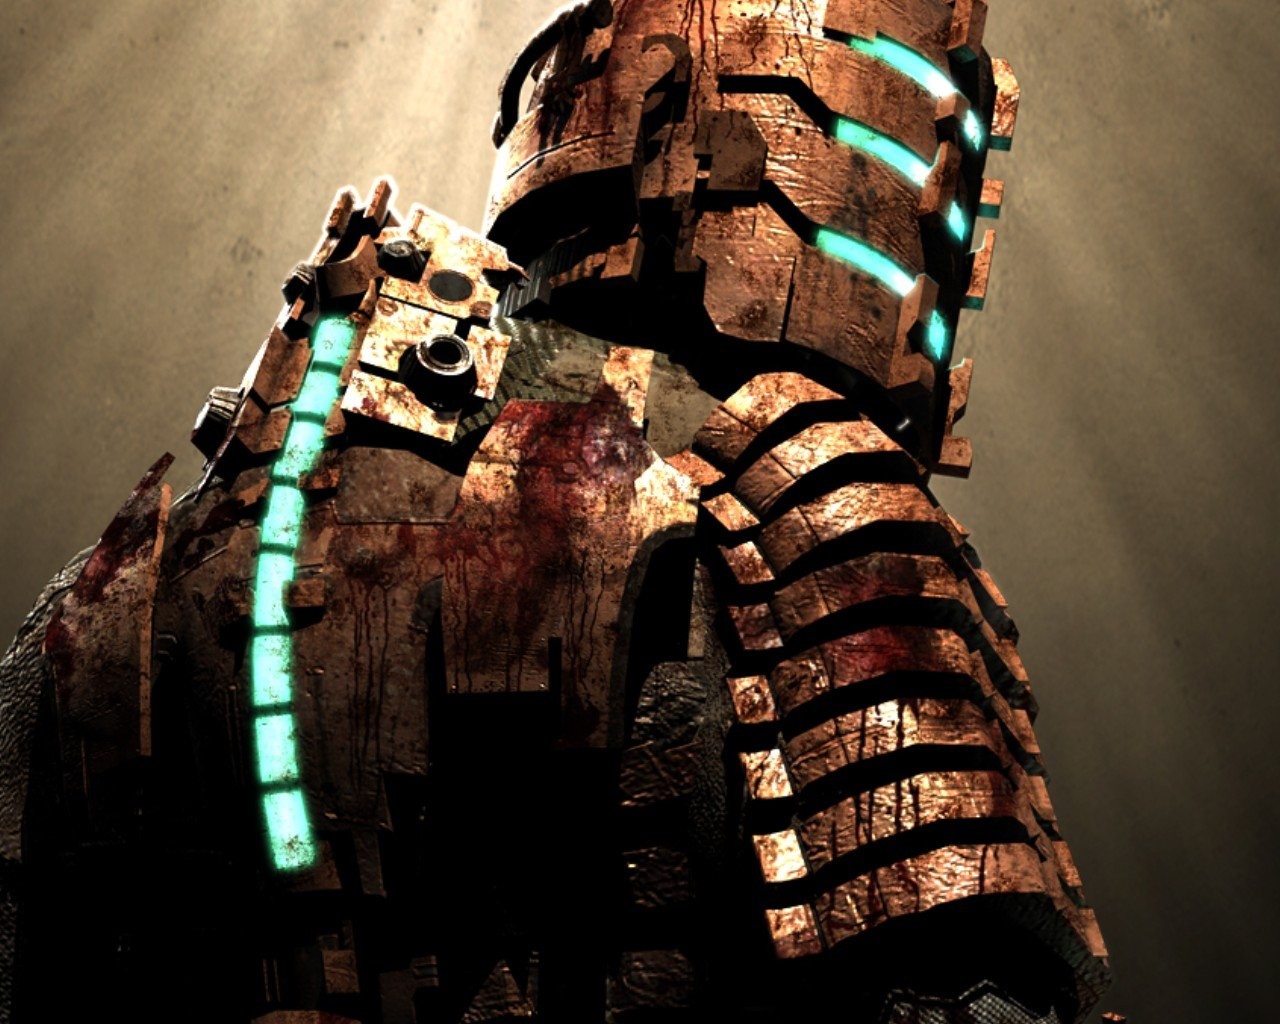 General 1280x1024 Dead Space Isaac Clarke video games Science Fiction Men video game men science fiction horror armor video game art